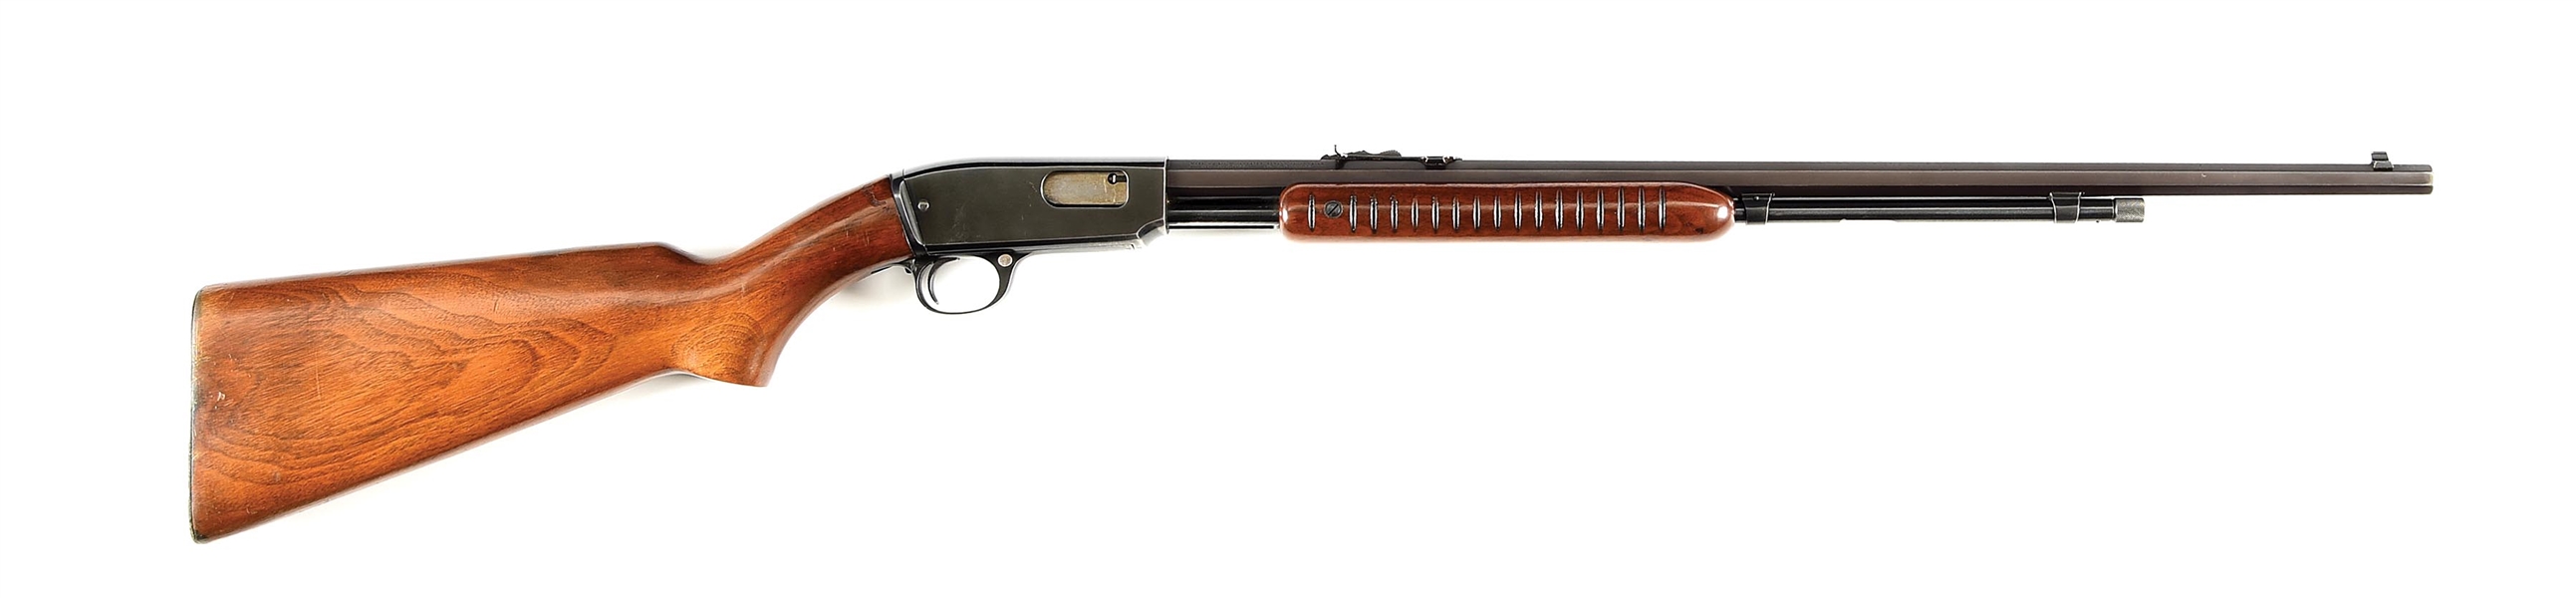 (C) SPECIAL ORDER WINCHESTER MODEL 61 SLIDE ACTION RIFLE.